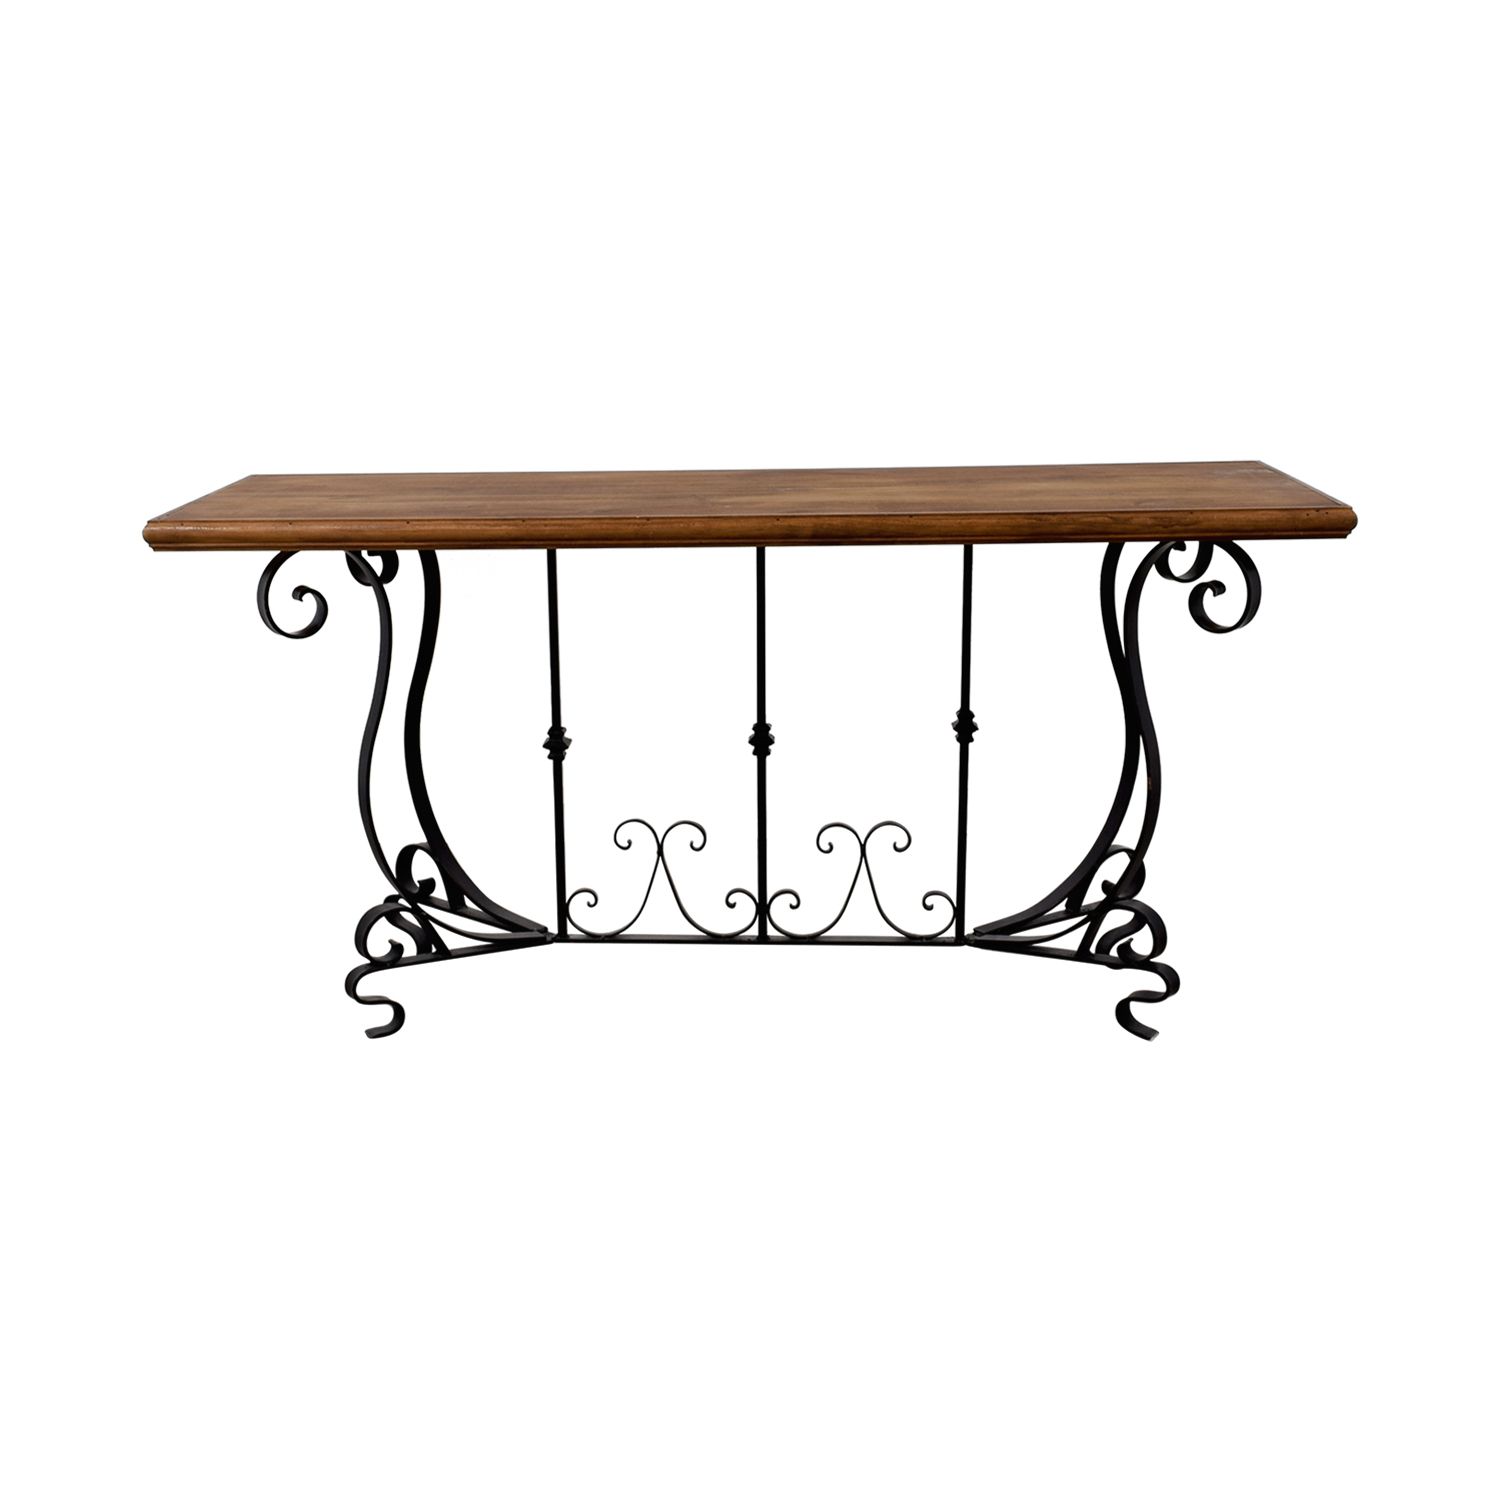 [%90% Off – Black Iron Scroll Base And Rustic Wood Console Throughout Popular Black Metal Console Tables|black Metal Console Tables Pertaining To Most Popular 90% Off – Black Iron Scroll Base And Rustic Wood Console|famous Black Metal Console Tables Throughout 90% Off – Black Iron Scroll Base And Rustic Wood Console|famous 90% Off – Black Iron Scroll Base And Rustic Wood Console Intended For Black Metal Console Tables%] (View 5 of 10)